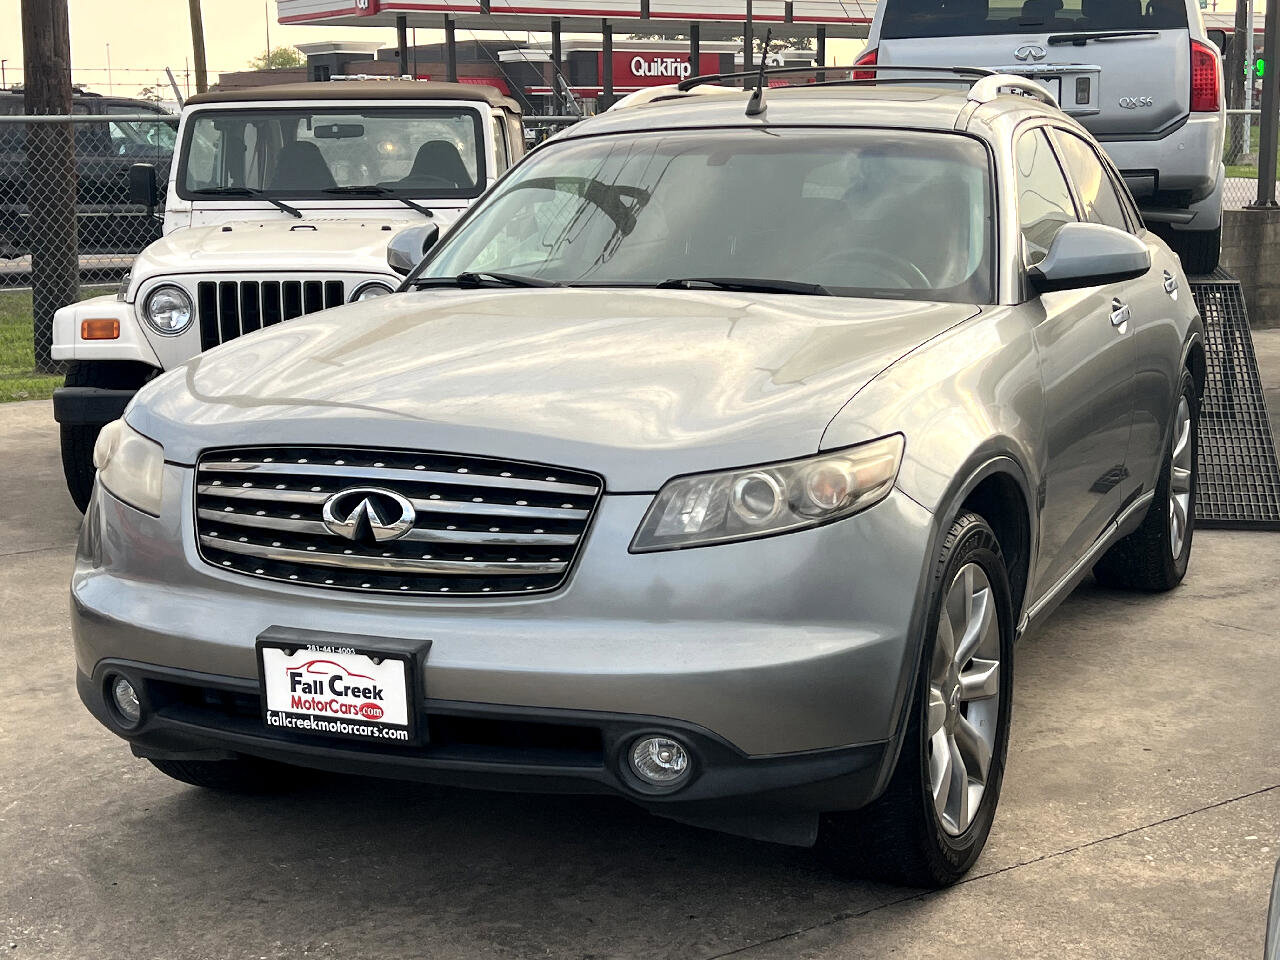 Used 2005 INFINITI FX45 for Sale Right Now - Autotrader